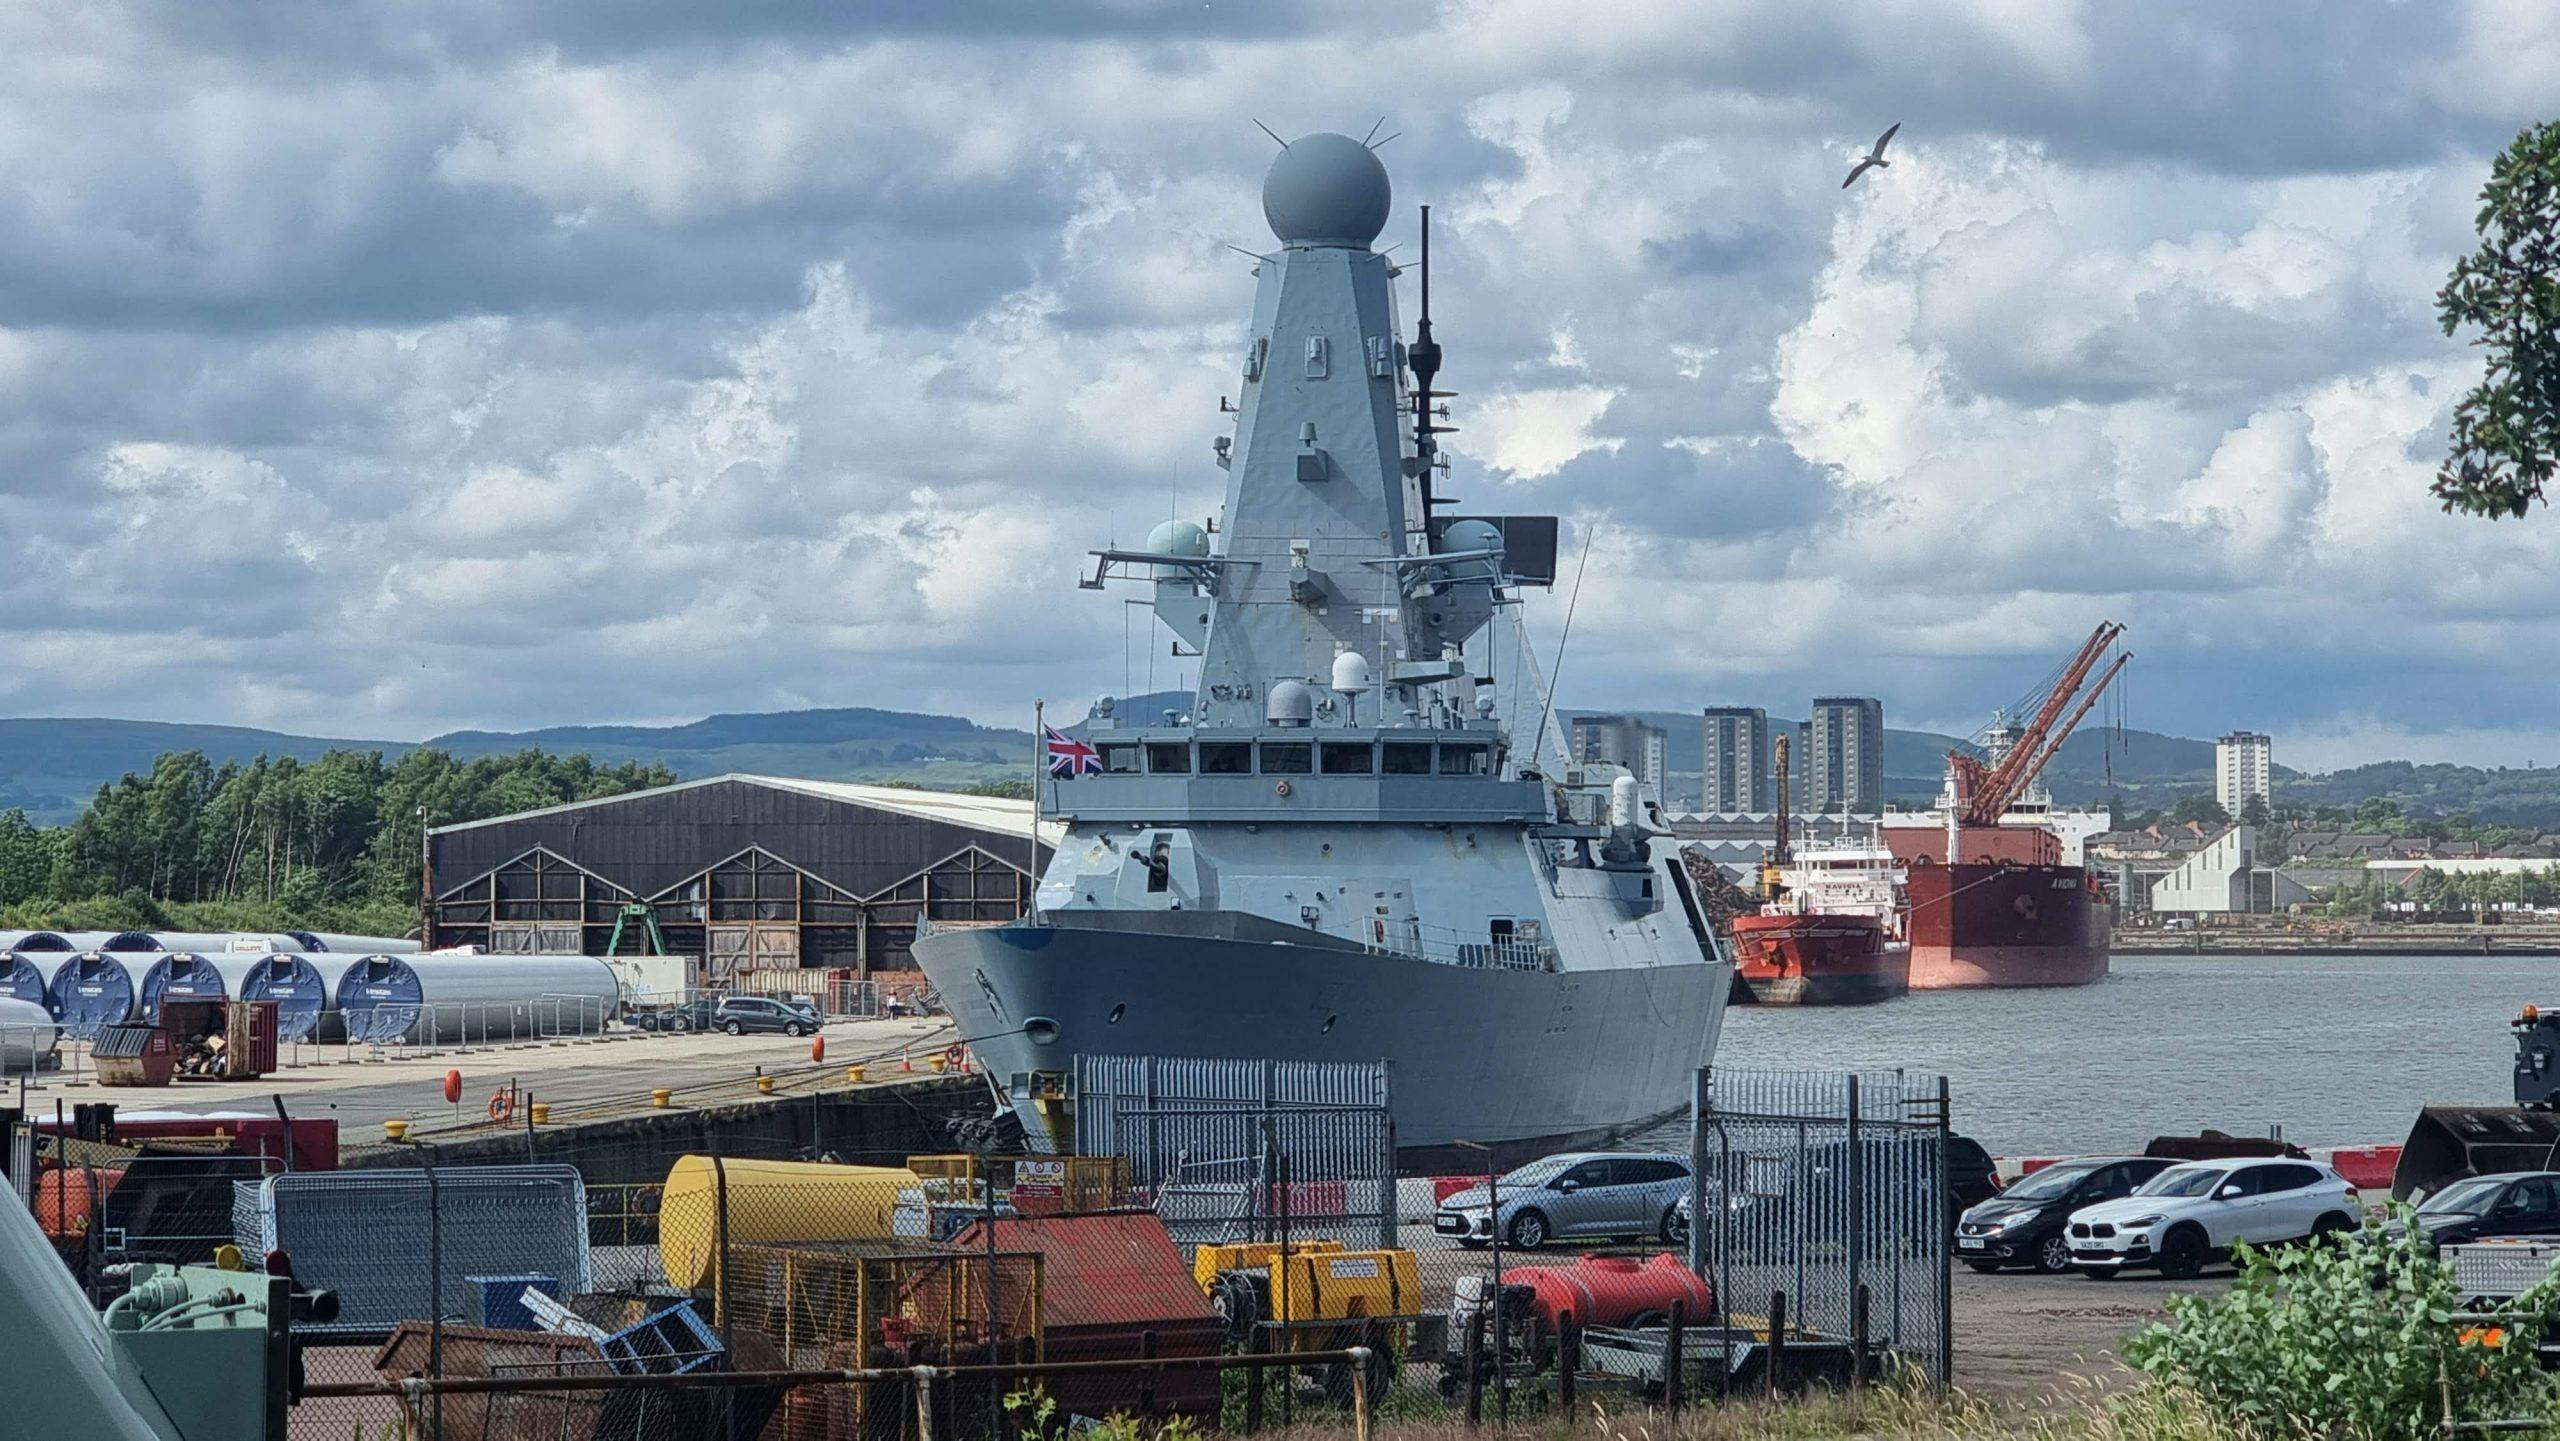 Images show powerful warship in Glasgow